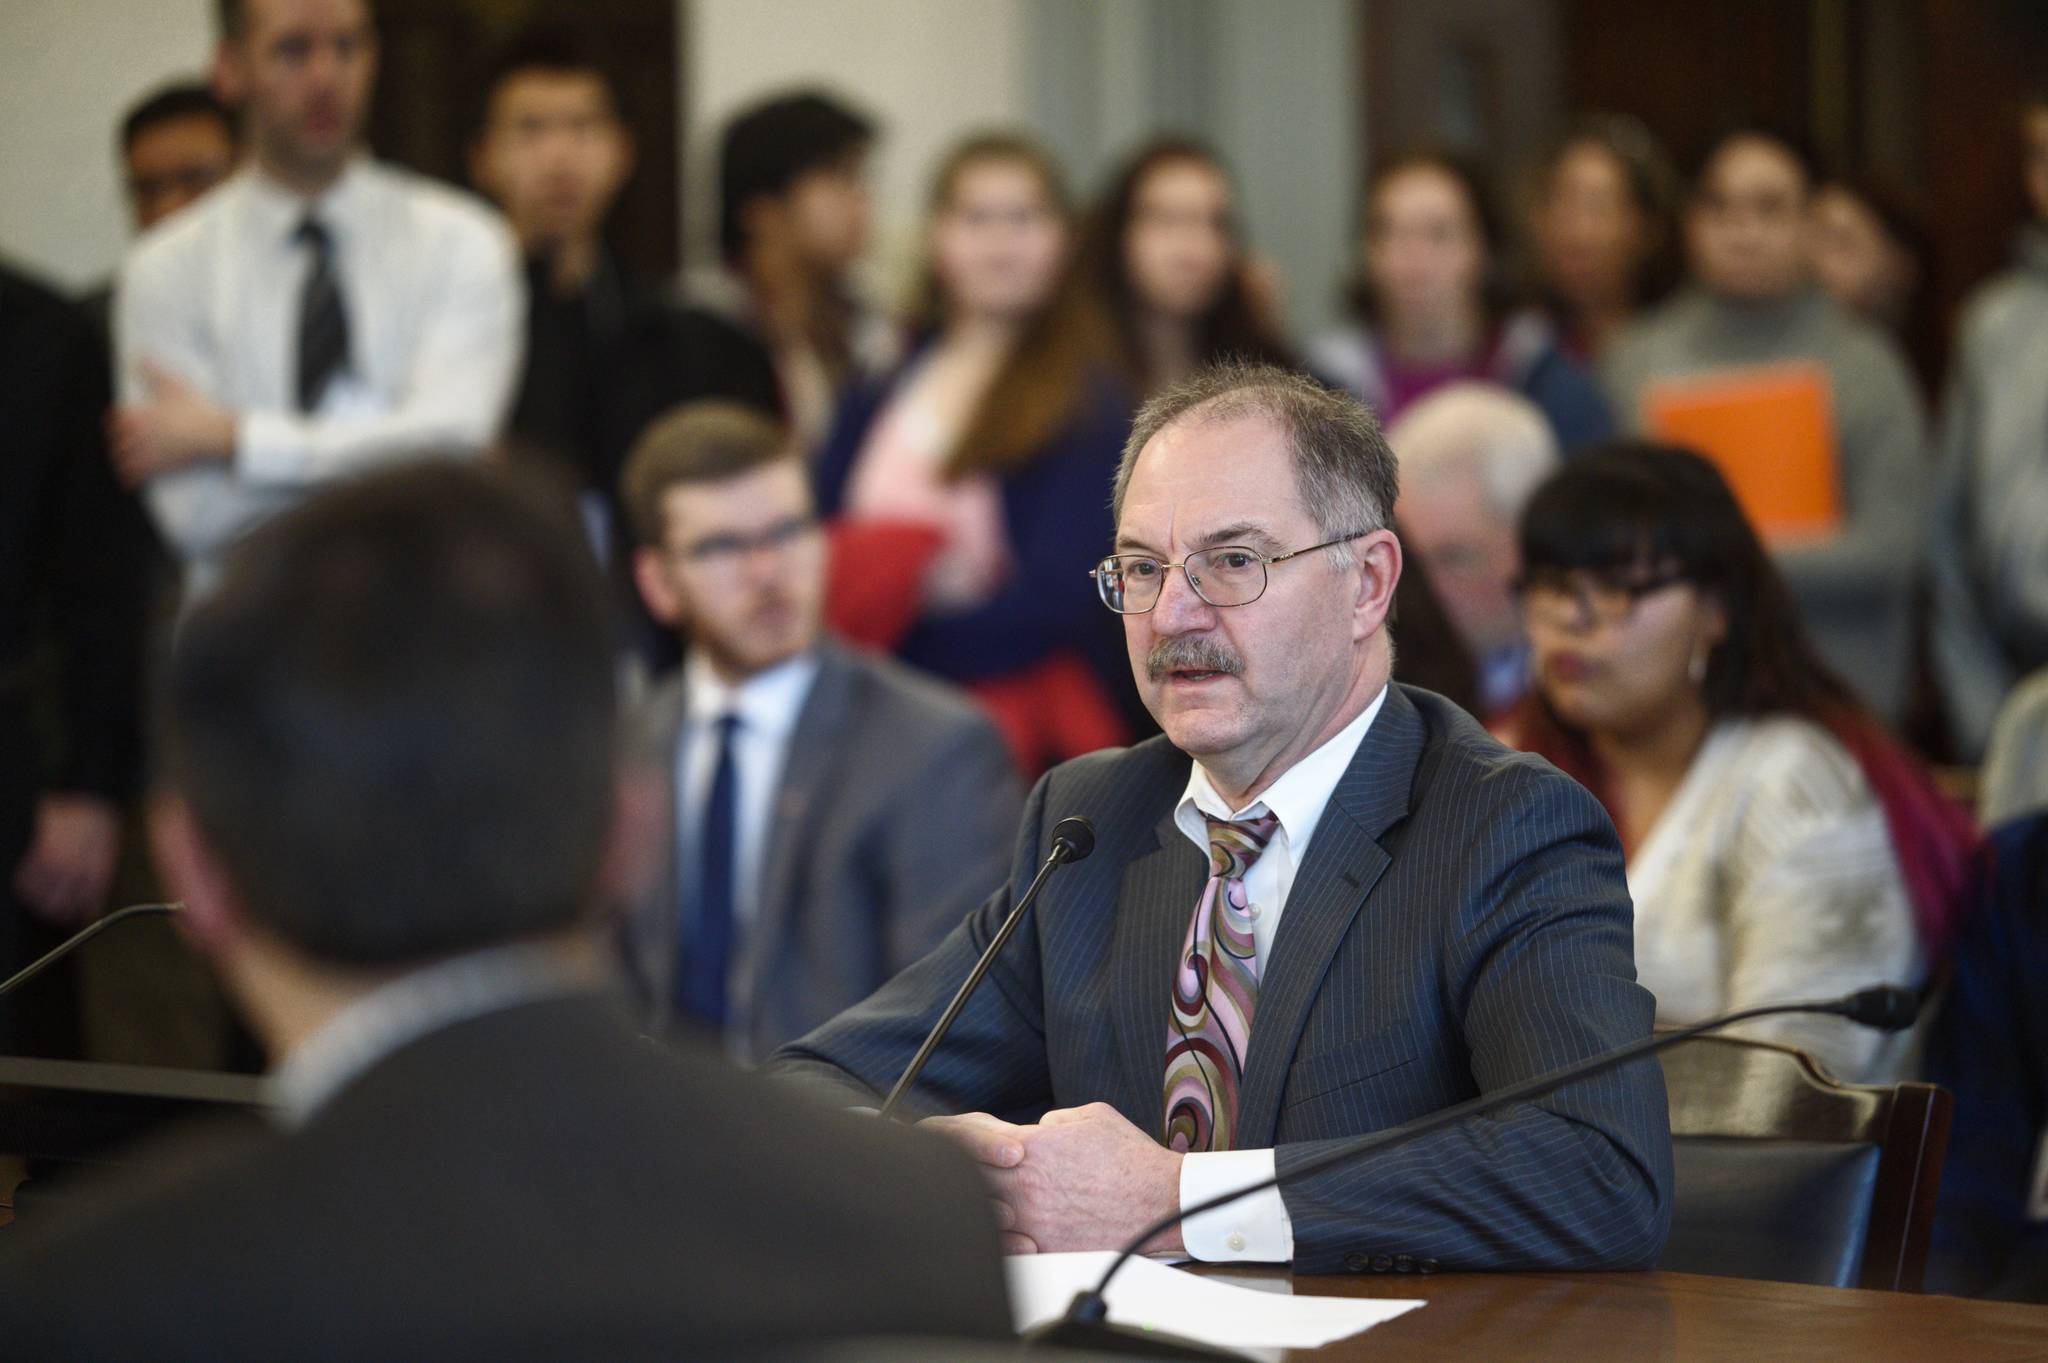 David Teal, Director of the Legislative Finance Division, gives his analysis of Gov. Mike Dunleavy’s state budget to the Senate Finance Committee at the Capitol on Tuesday, Feb. 26, 2019. (Michael Penn | Juneau Empire)